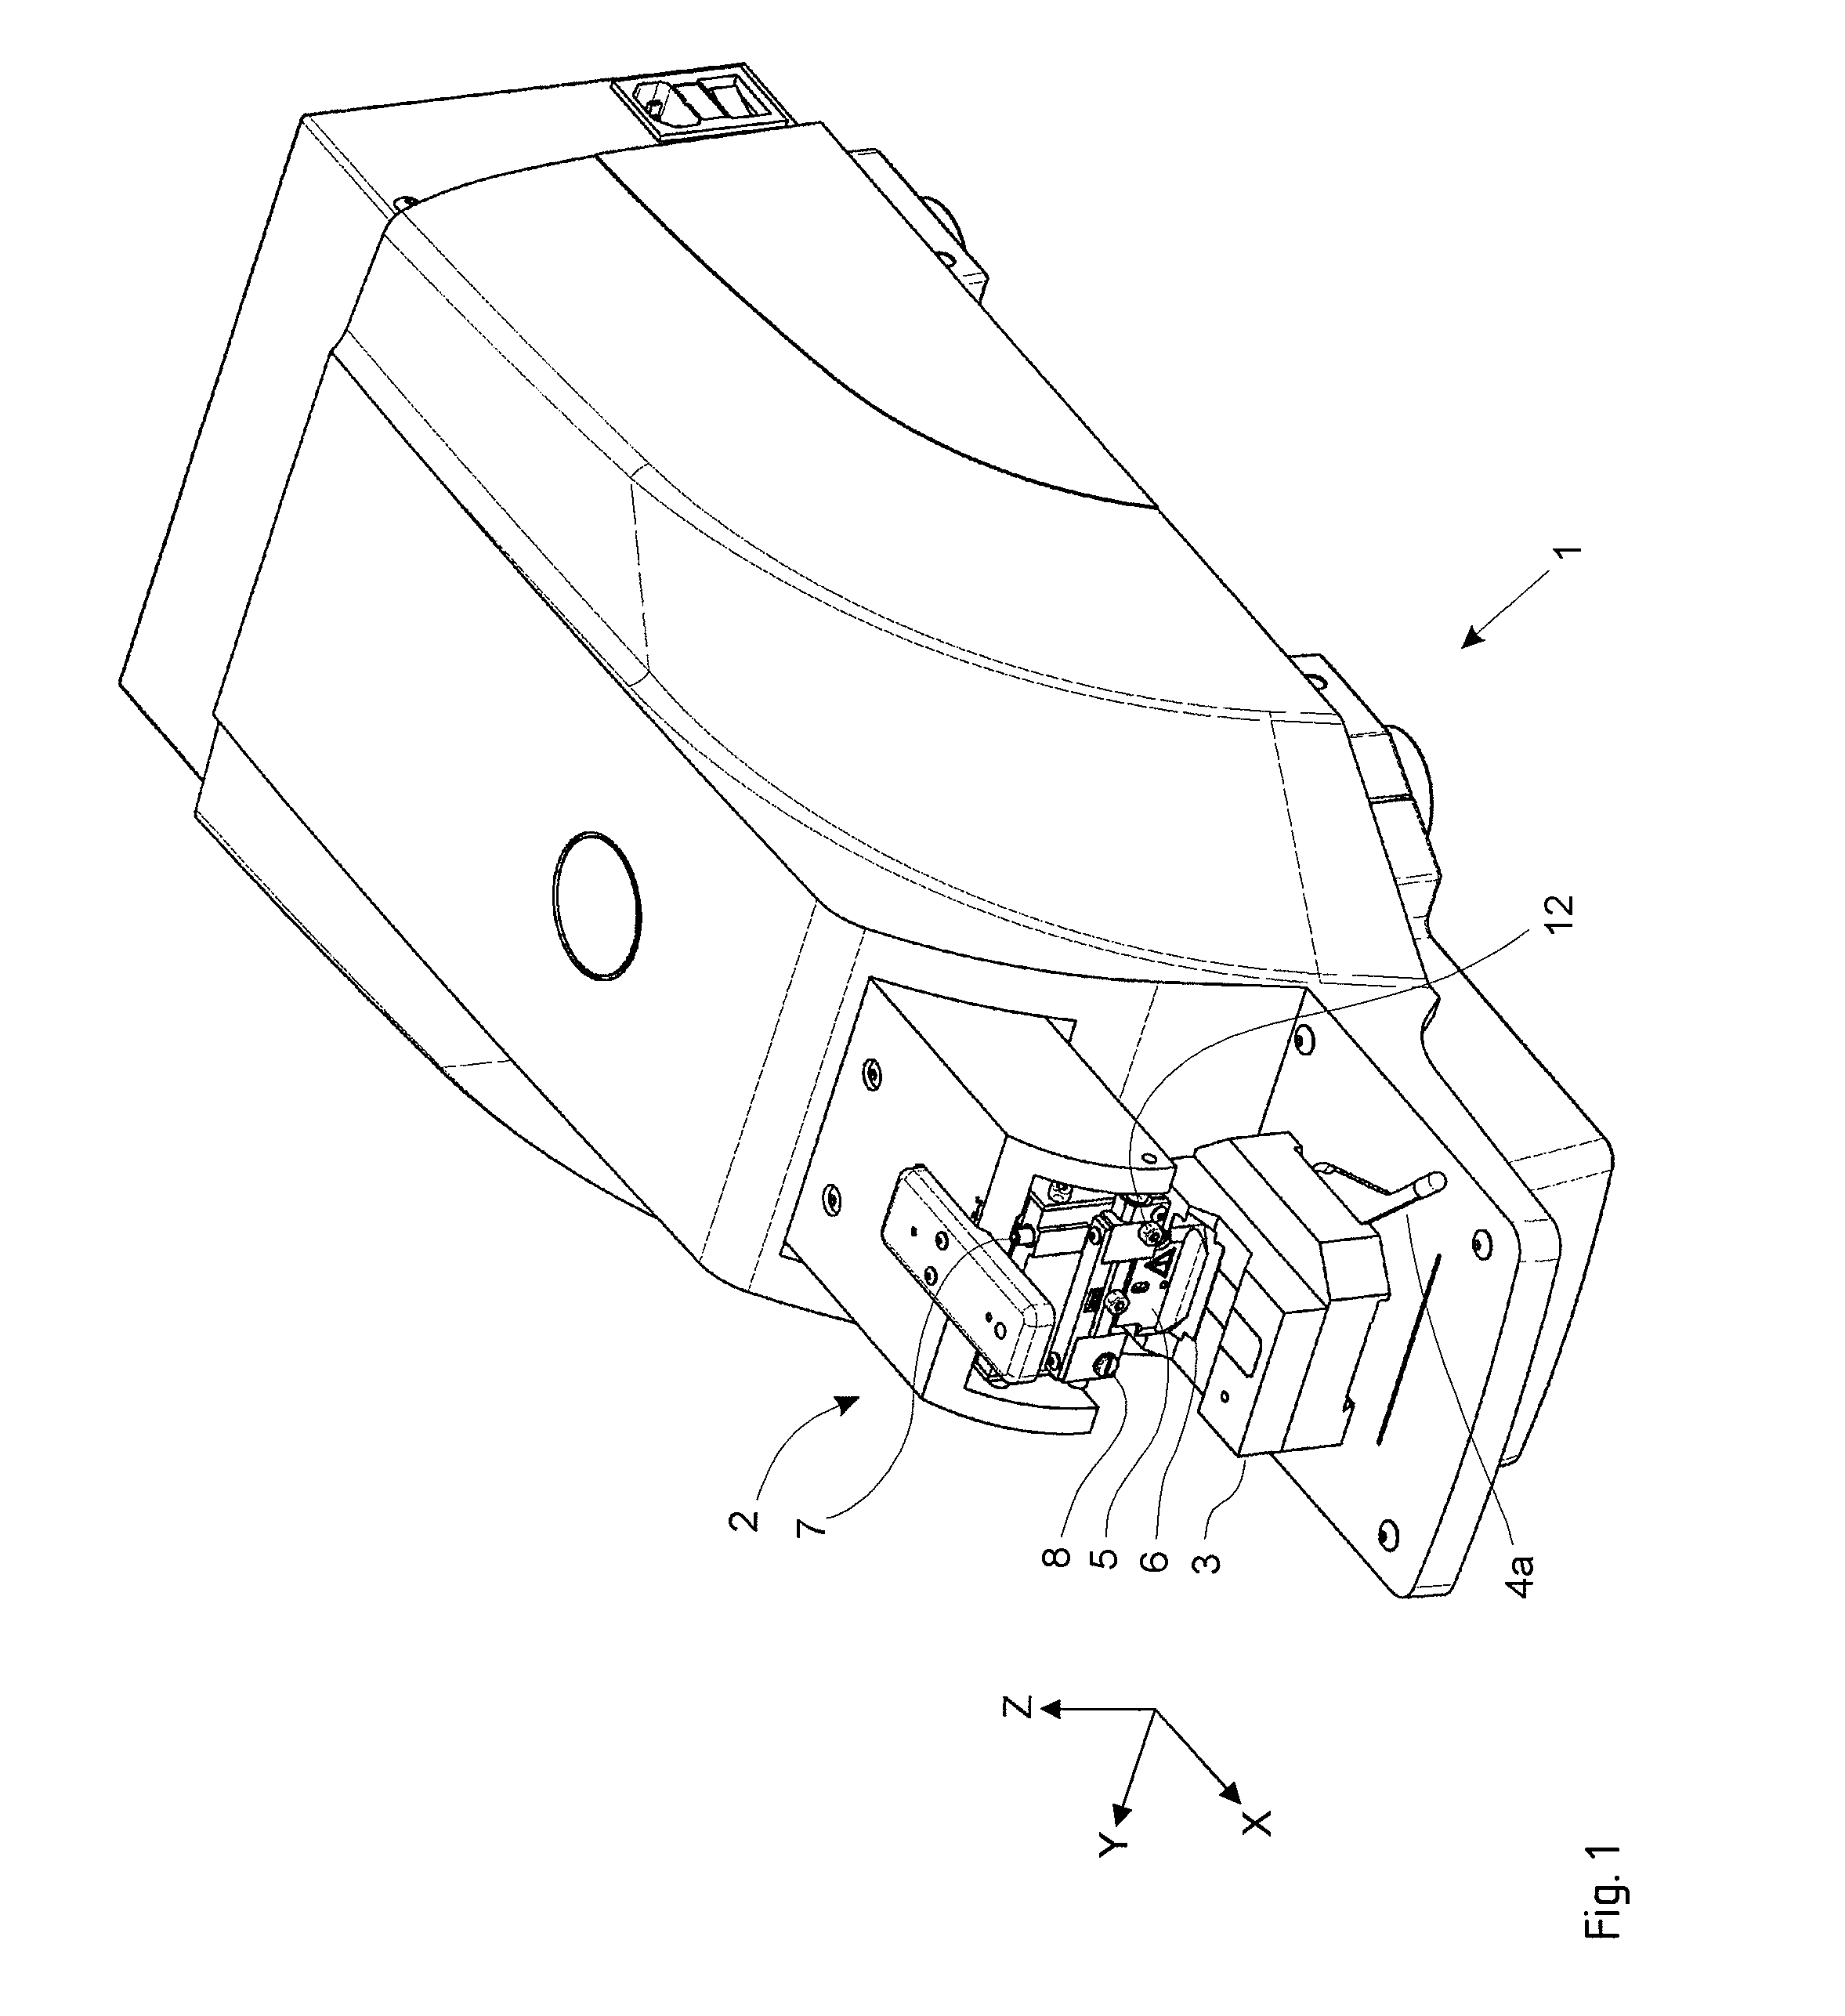 Vibrating Microtome With Automated Measurement Of Vertical Runout